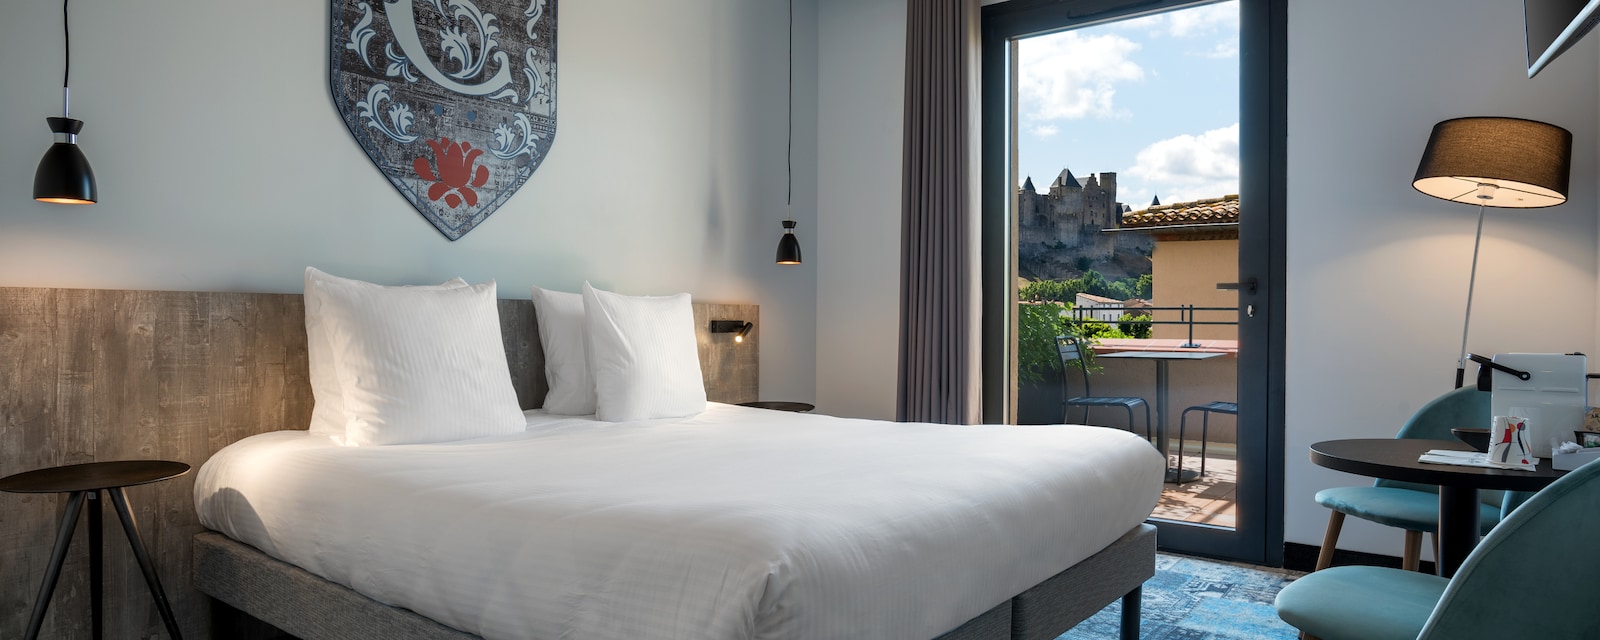 SOWELL Hotels Les Chevaliers - Chambre Deluxe